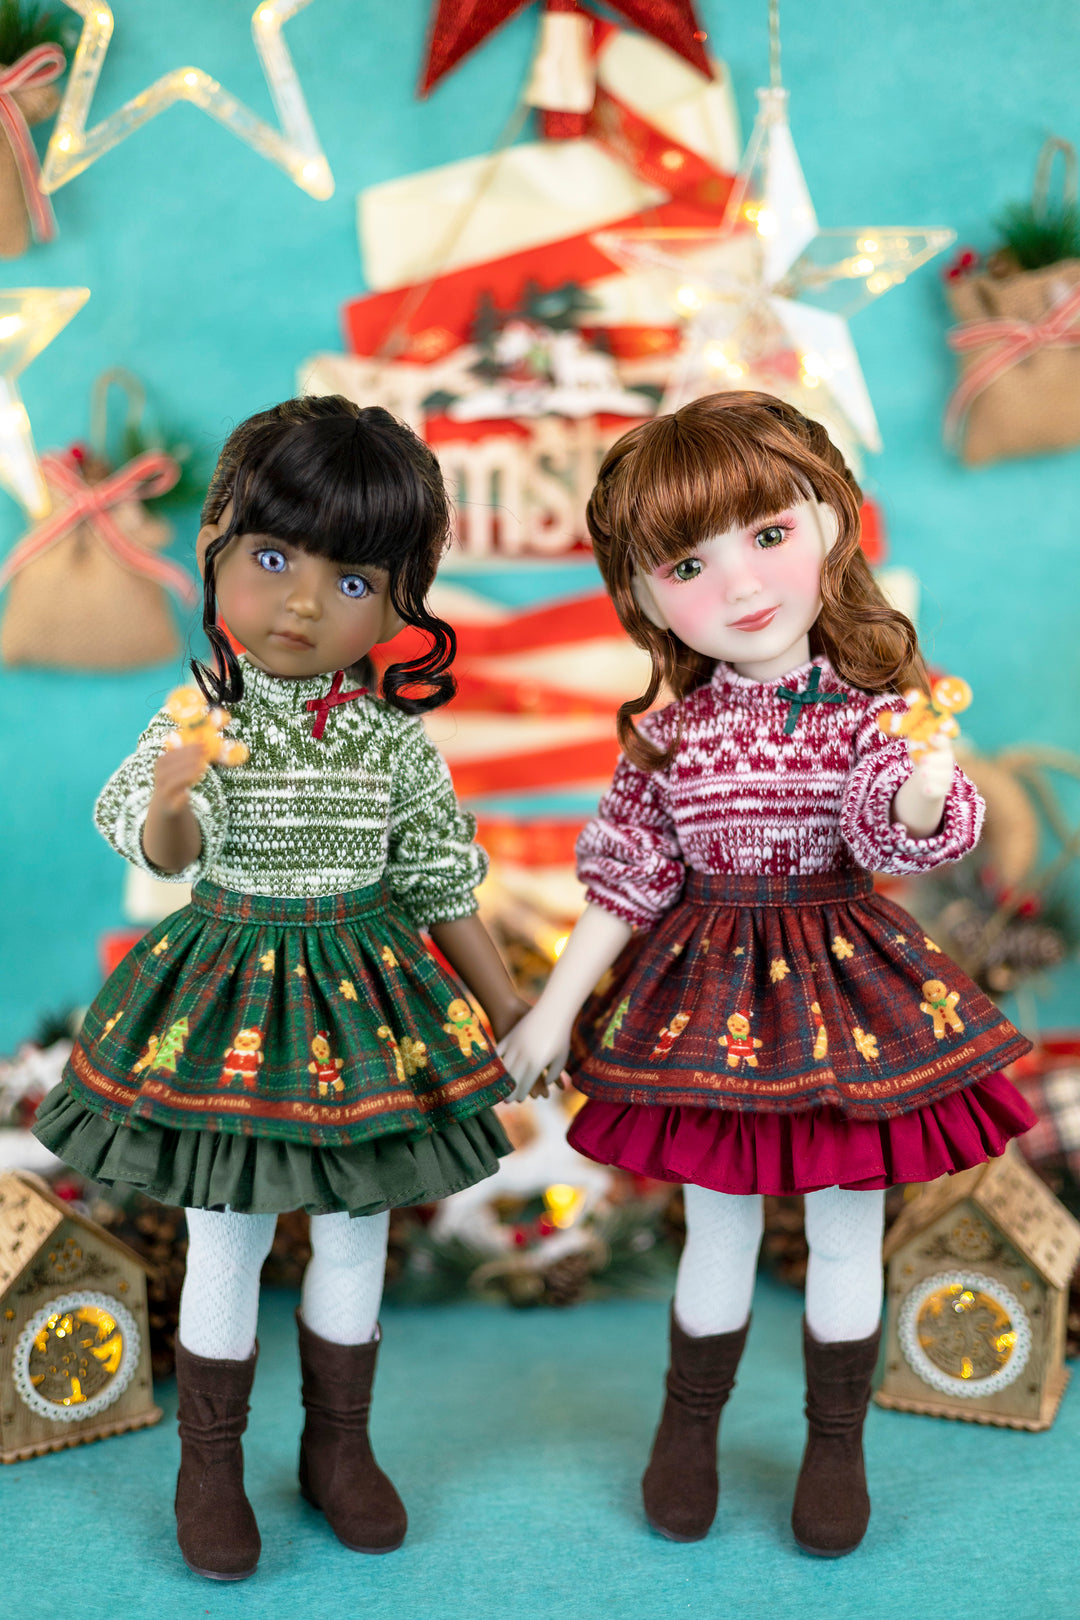 Holly 2022 Christmas Limited Edition - Ruby Red Fashion Friend doll